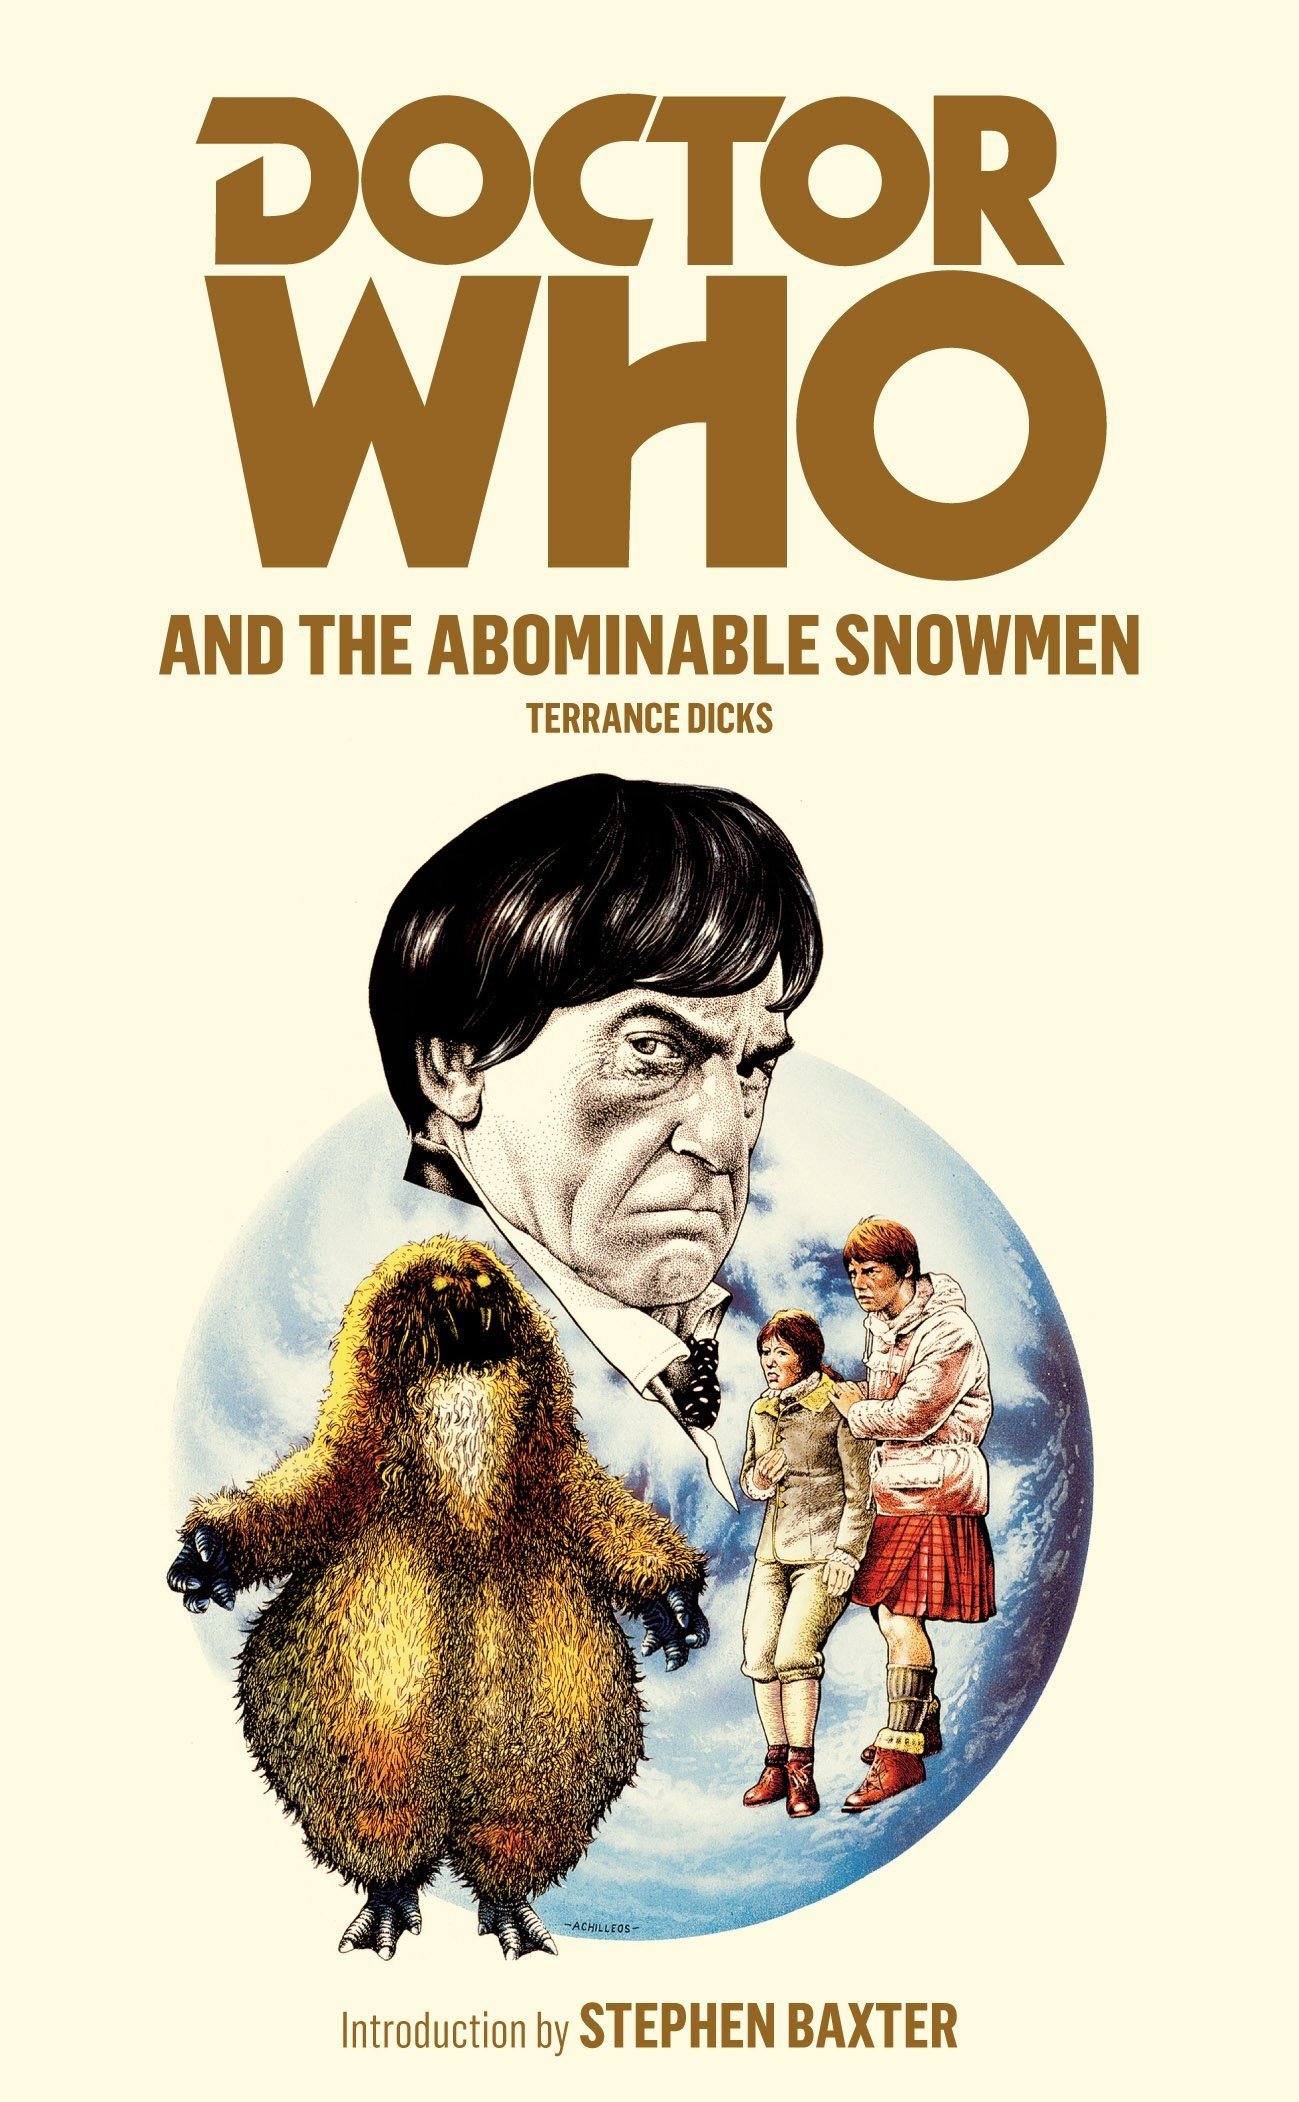 Reviewed: The Essential Terrance Dicks – Doctor Who and the Abominable Snowmen (Target)